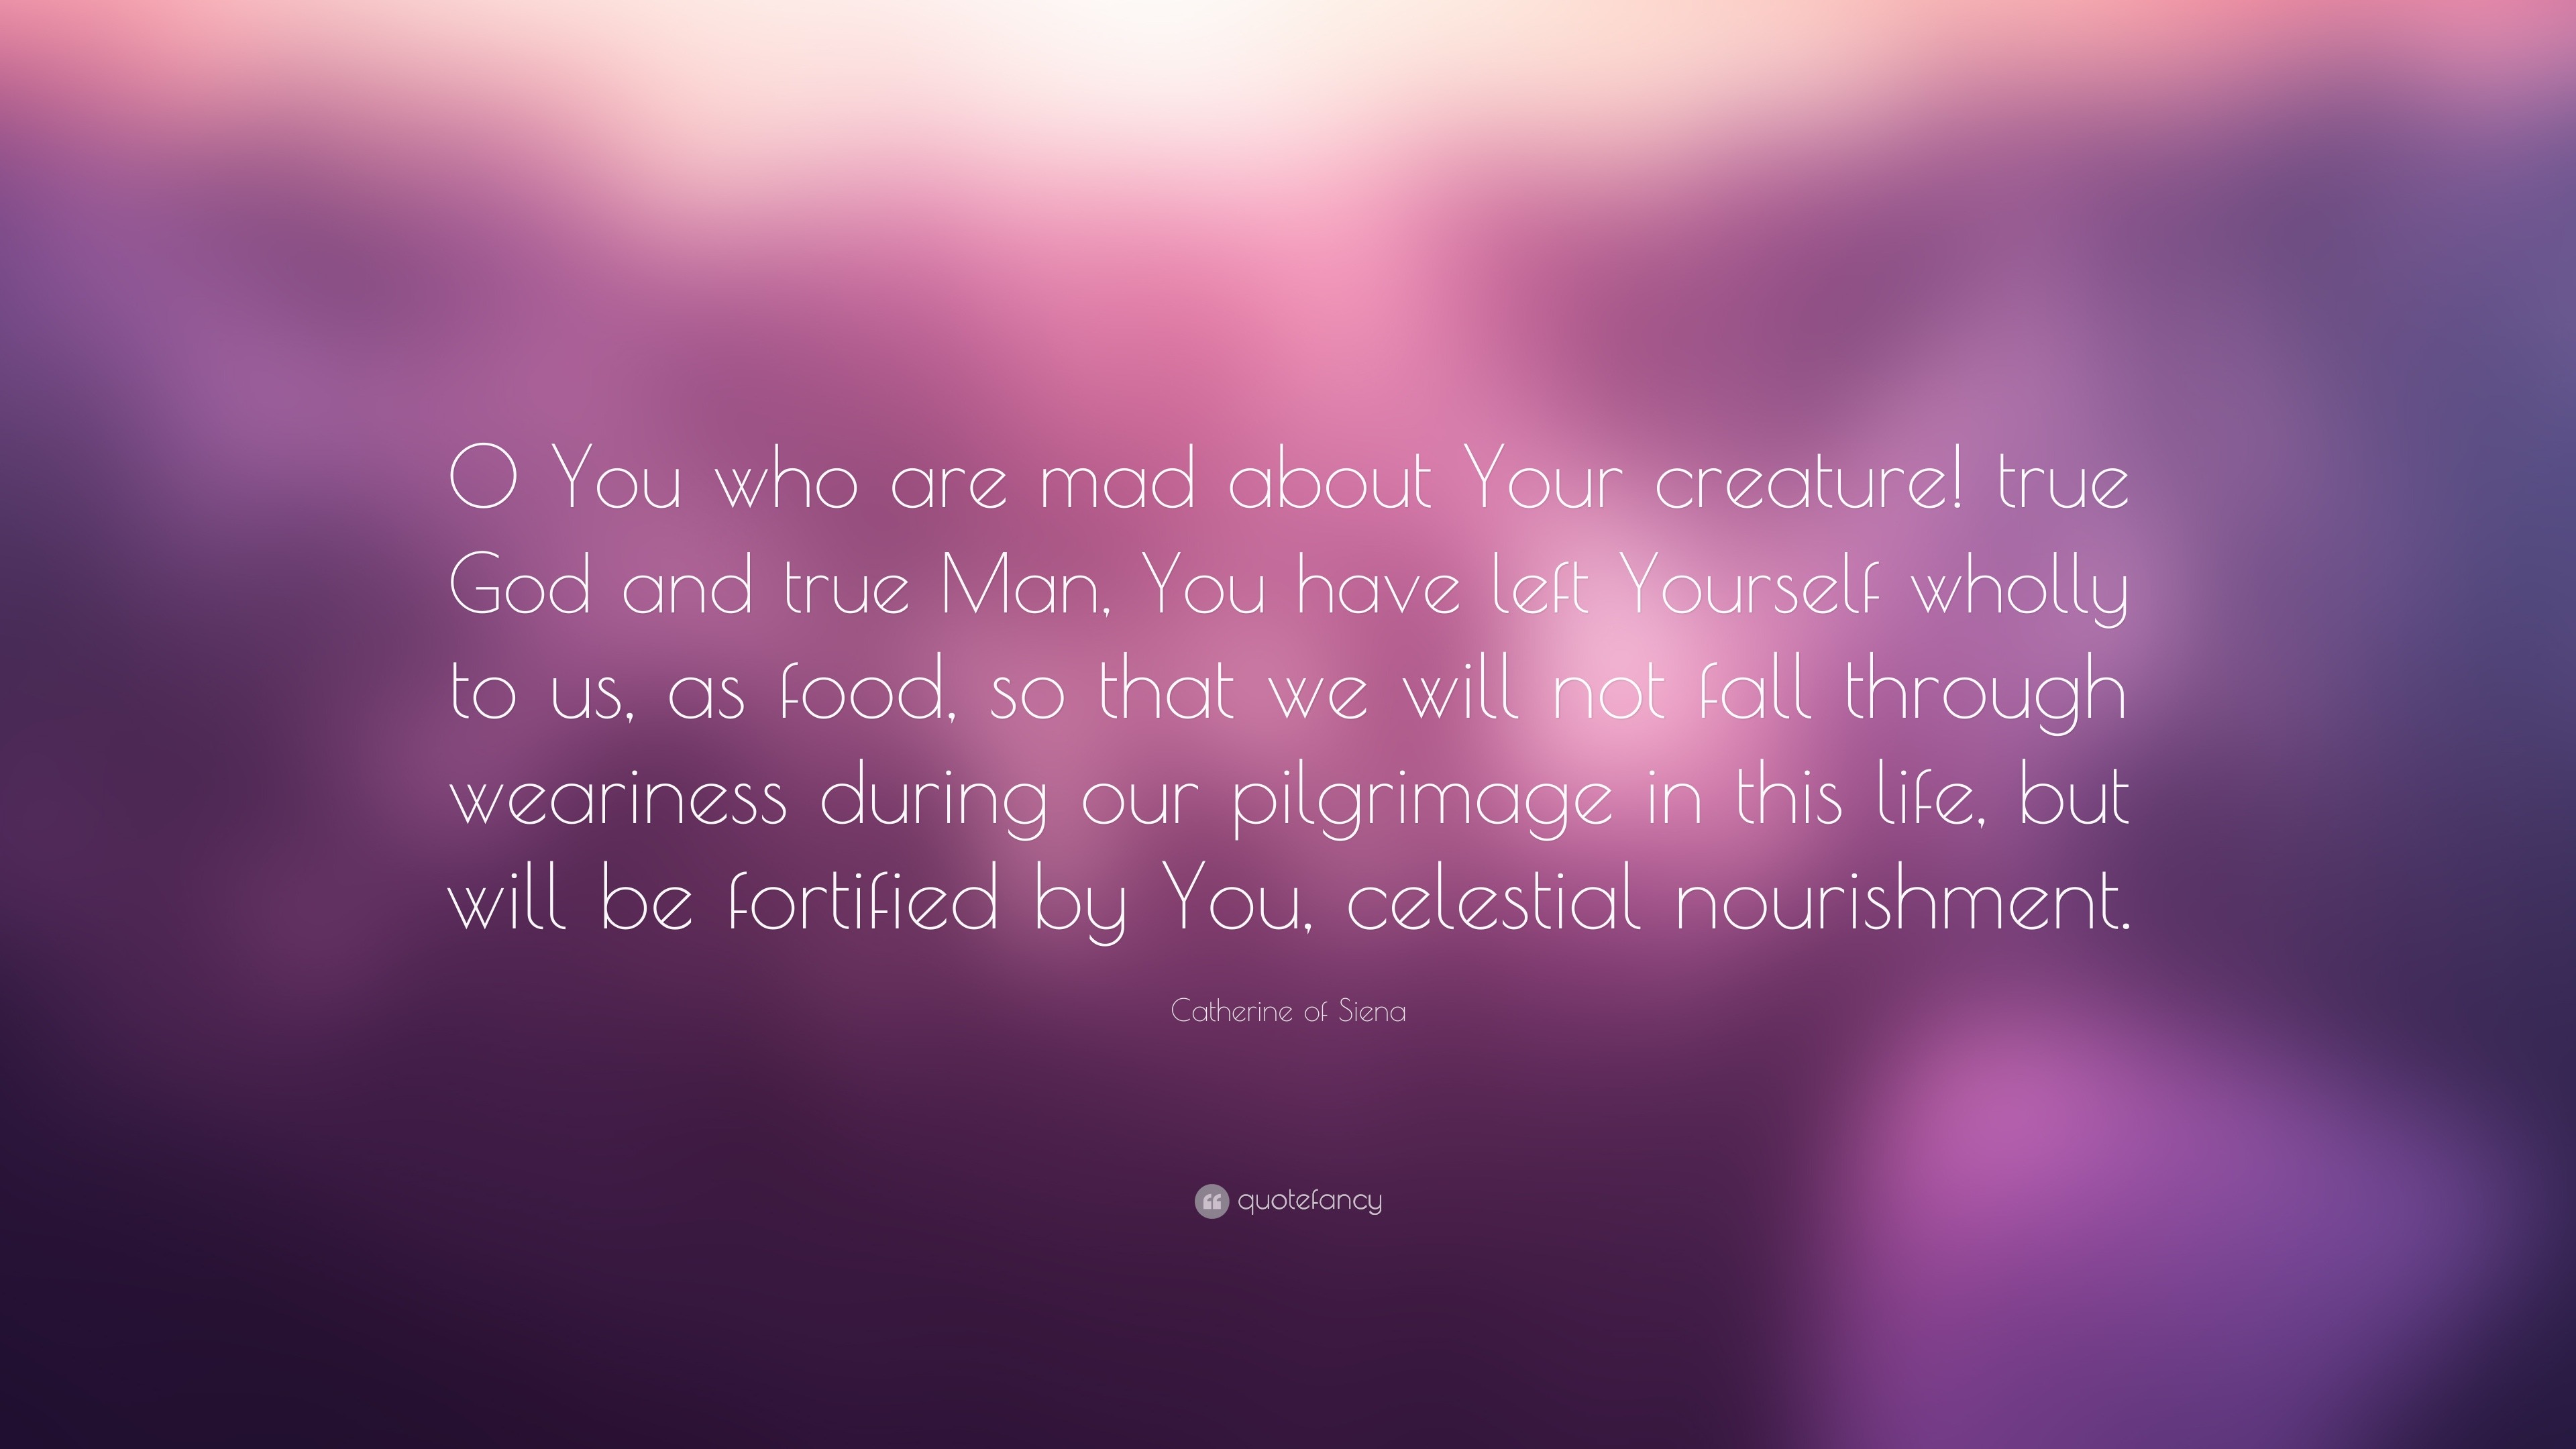 Catherine of Siena Quote: “O You who are mad about Your creature! true ...